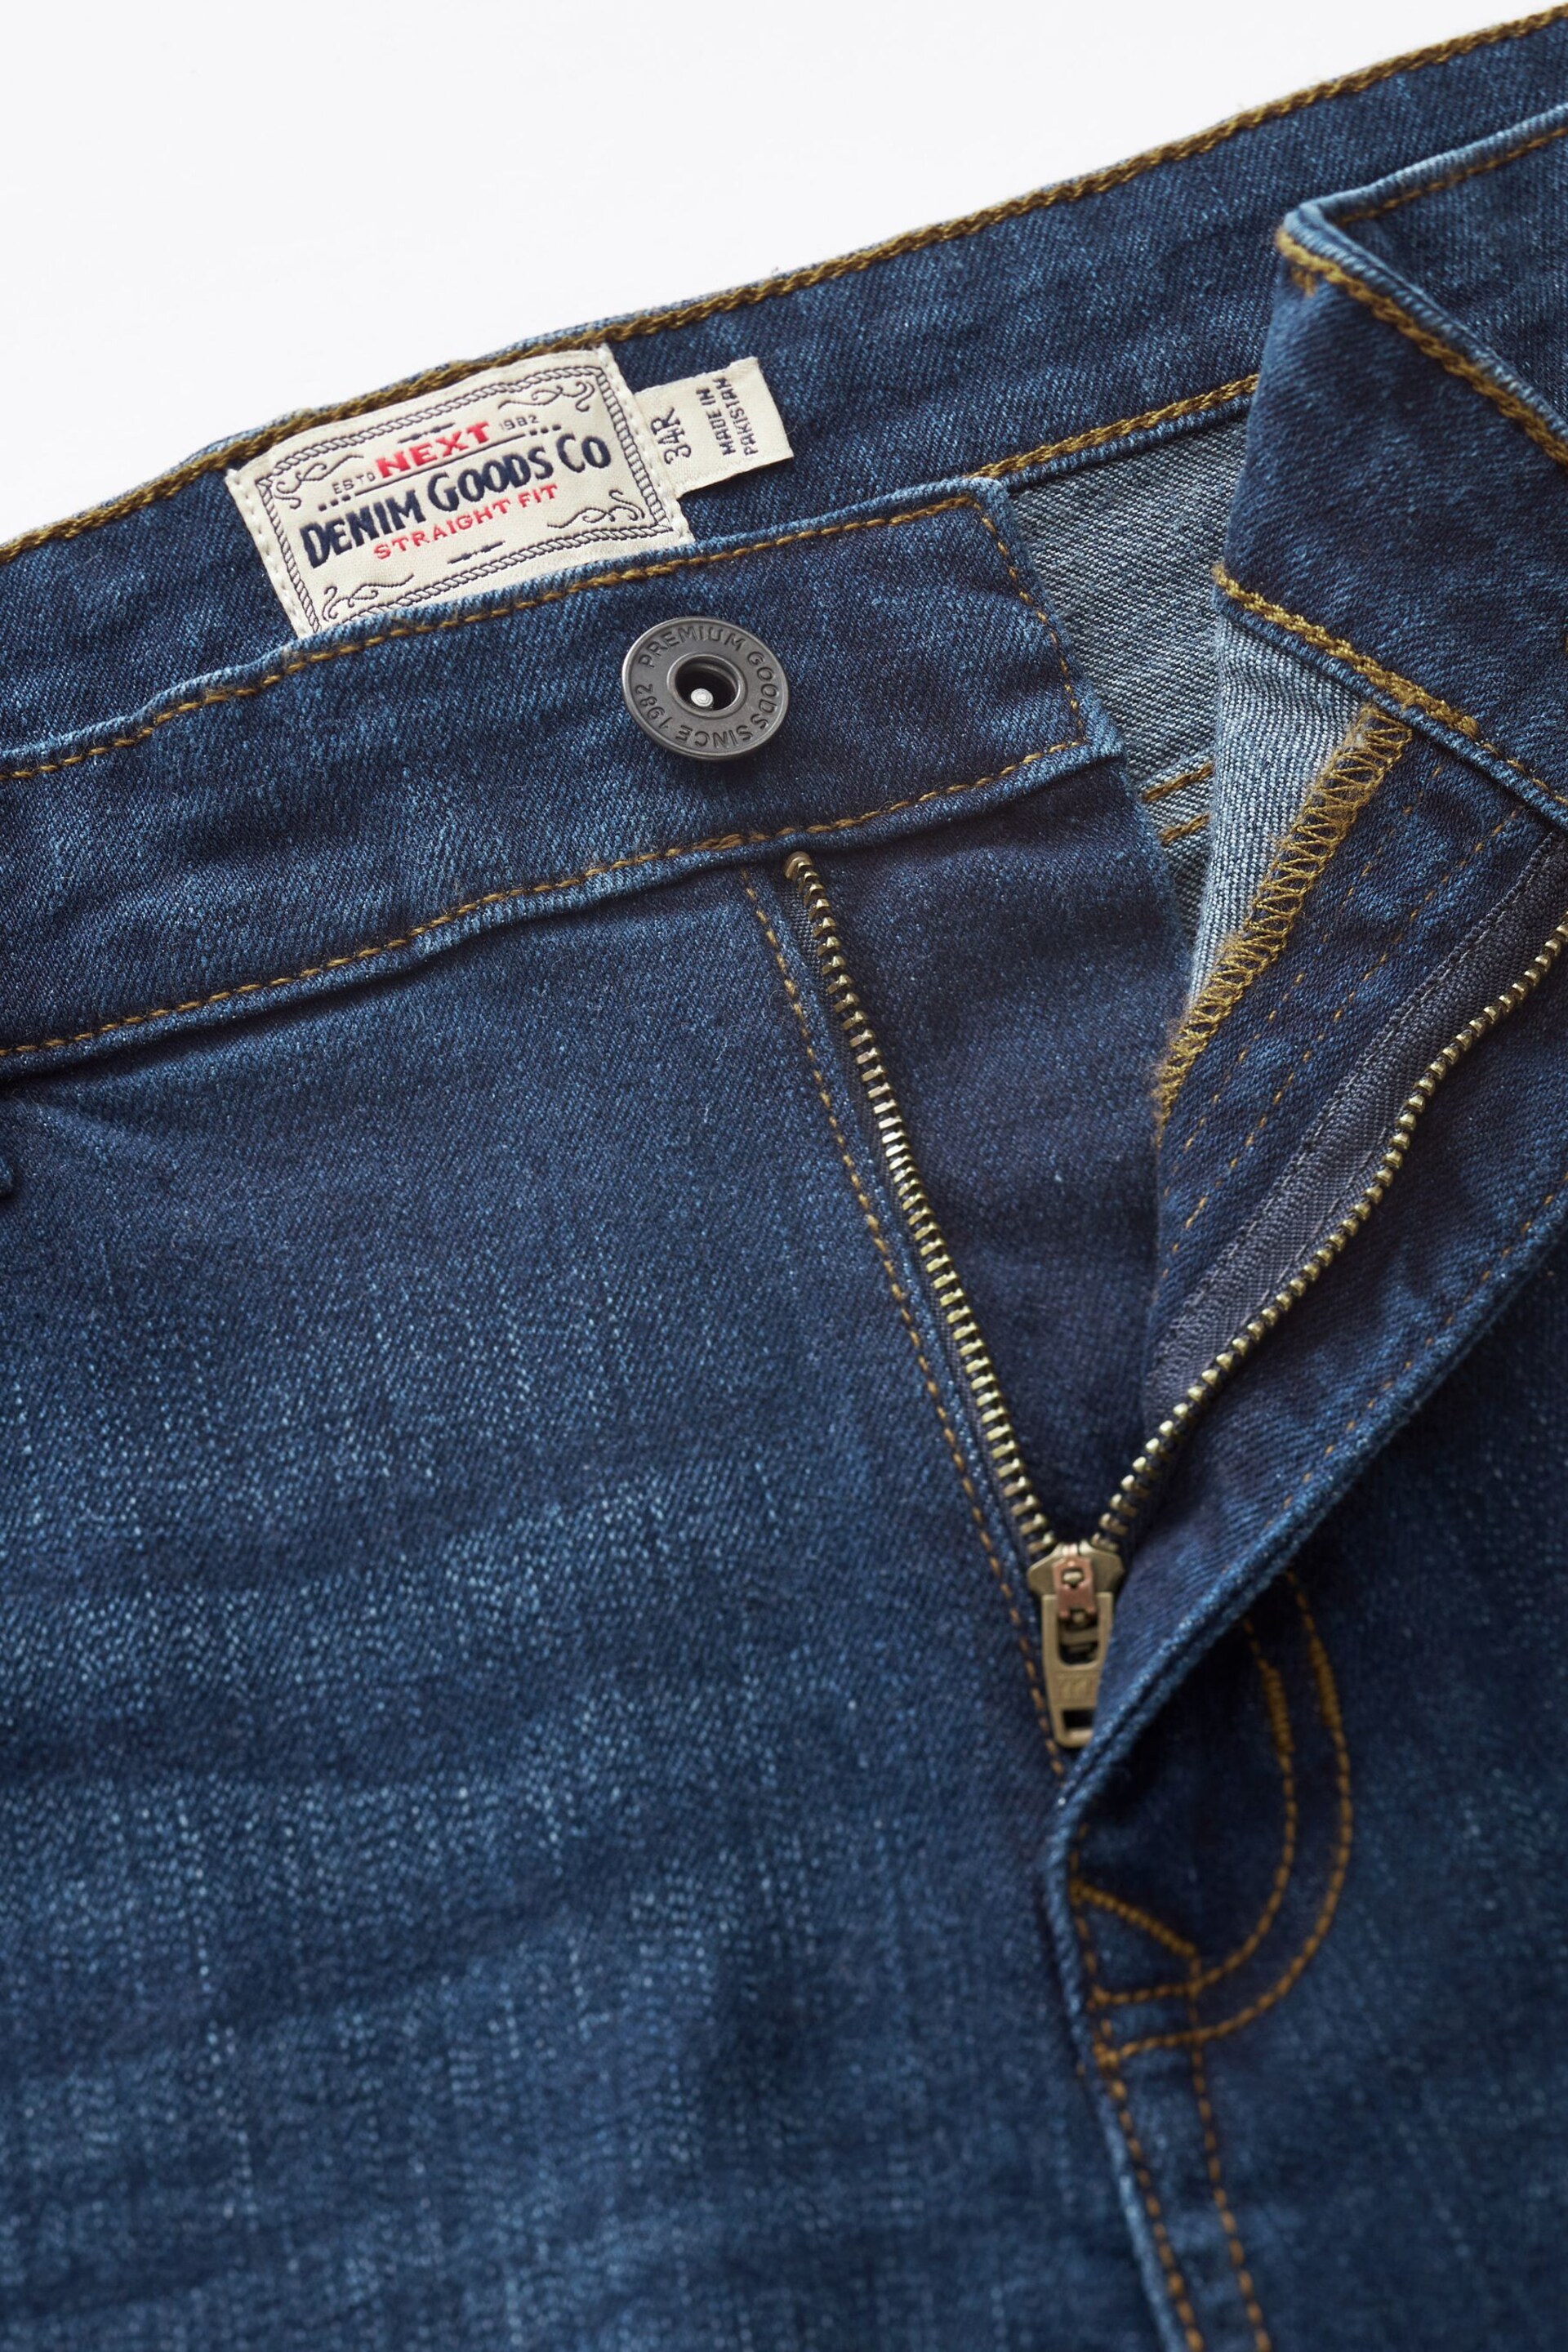 Blue Straight Belted Authentic Jeans - Image 7 of 9